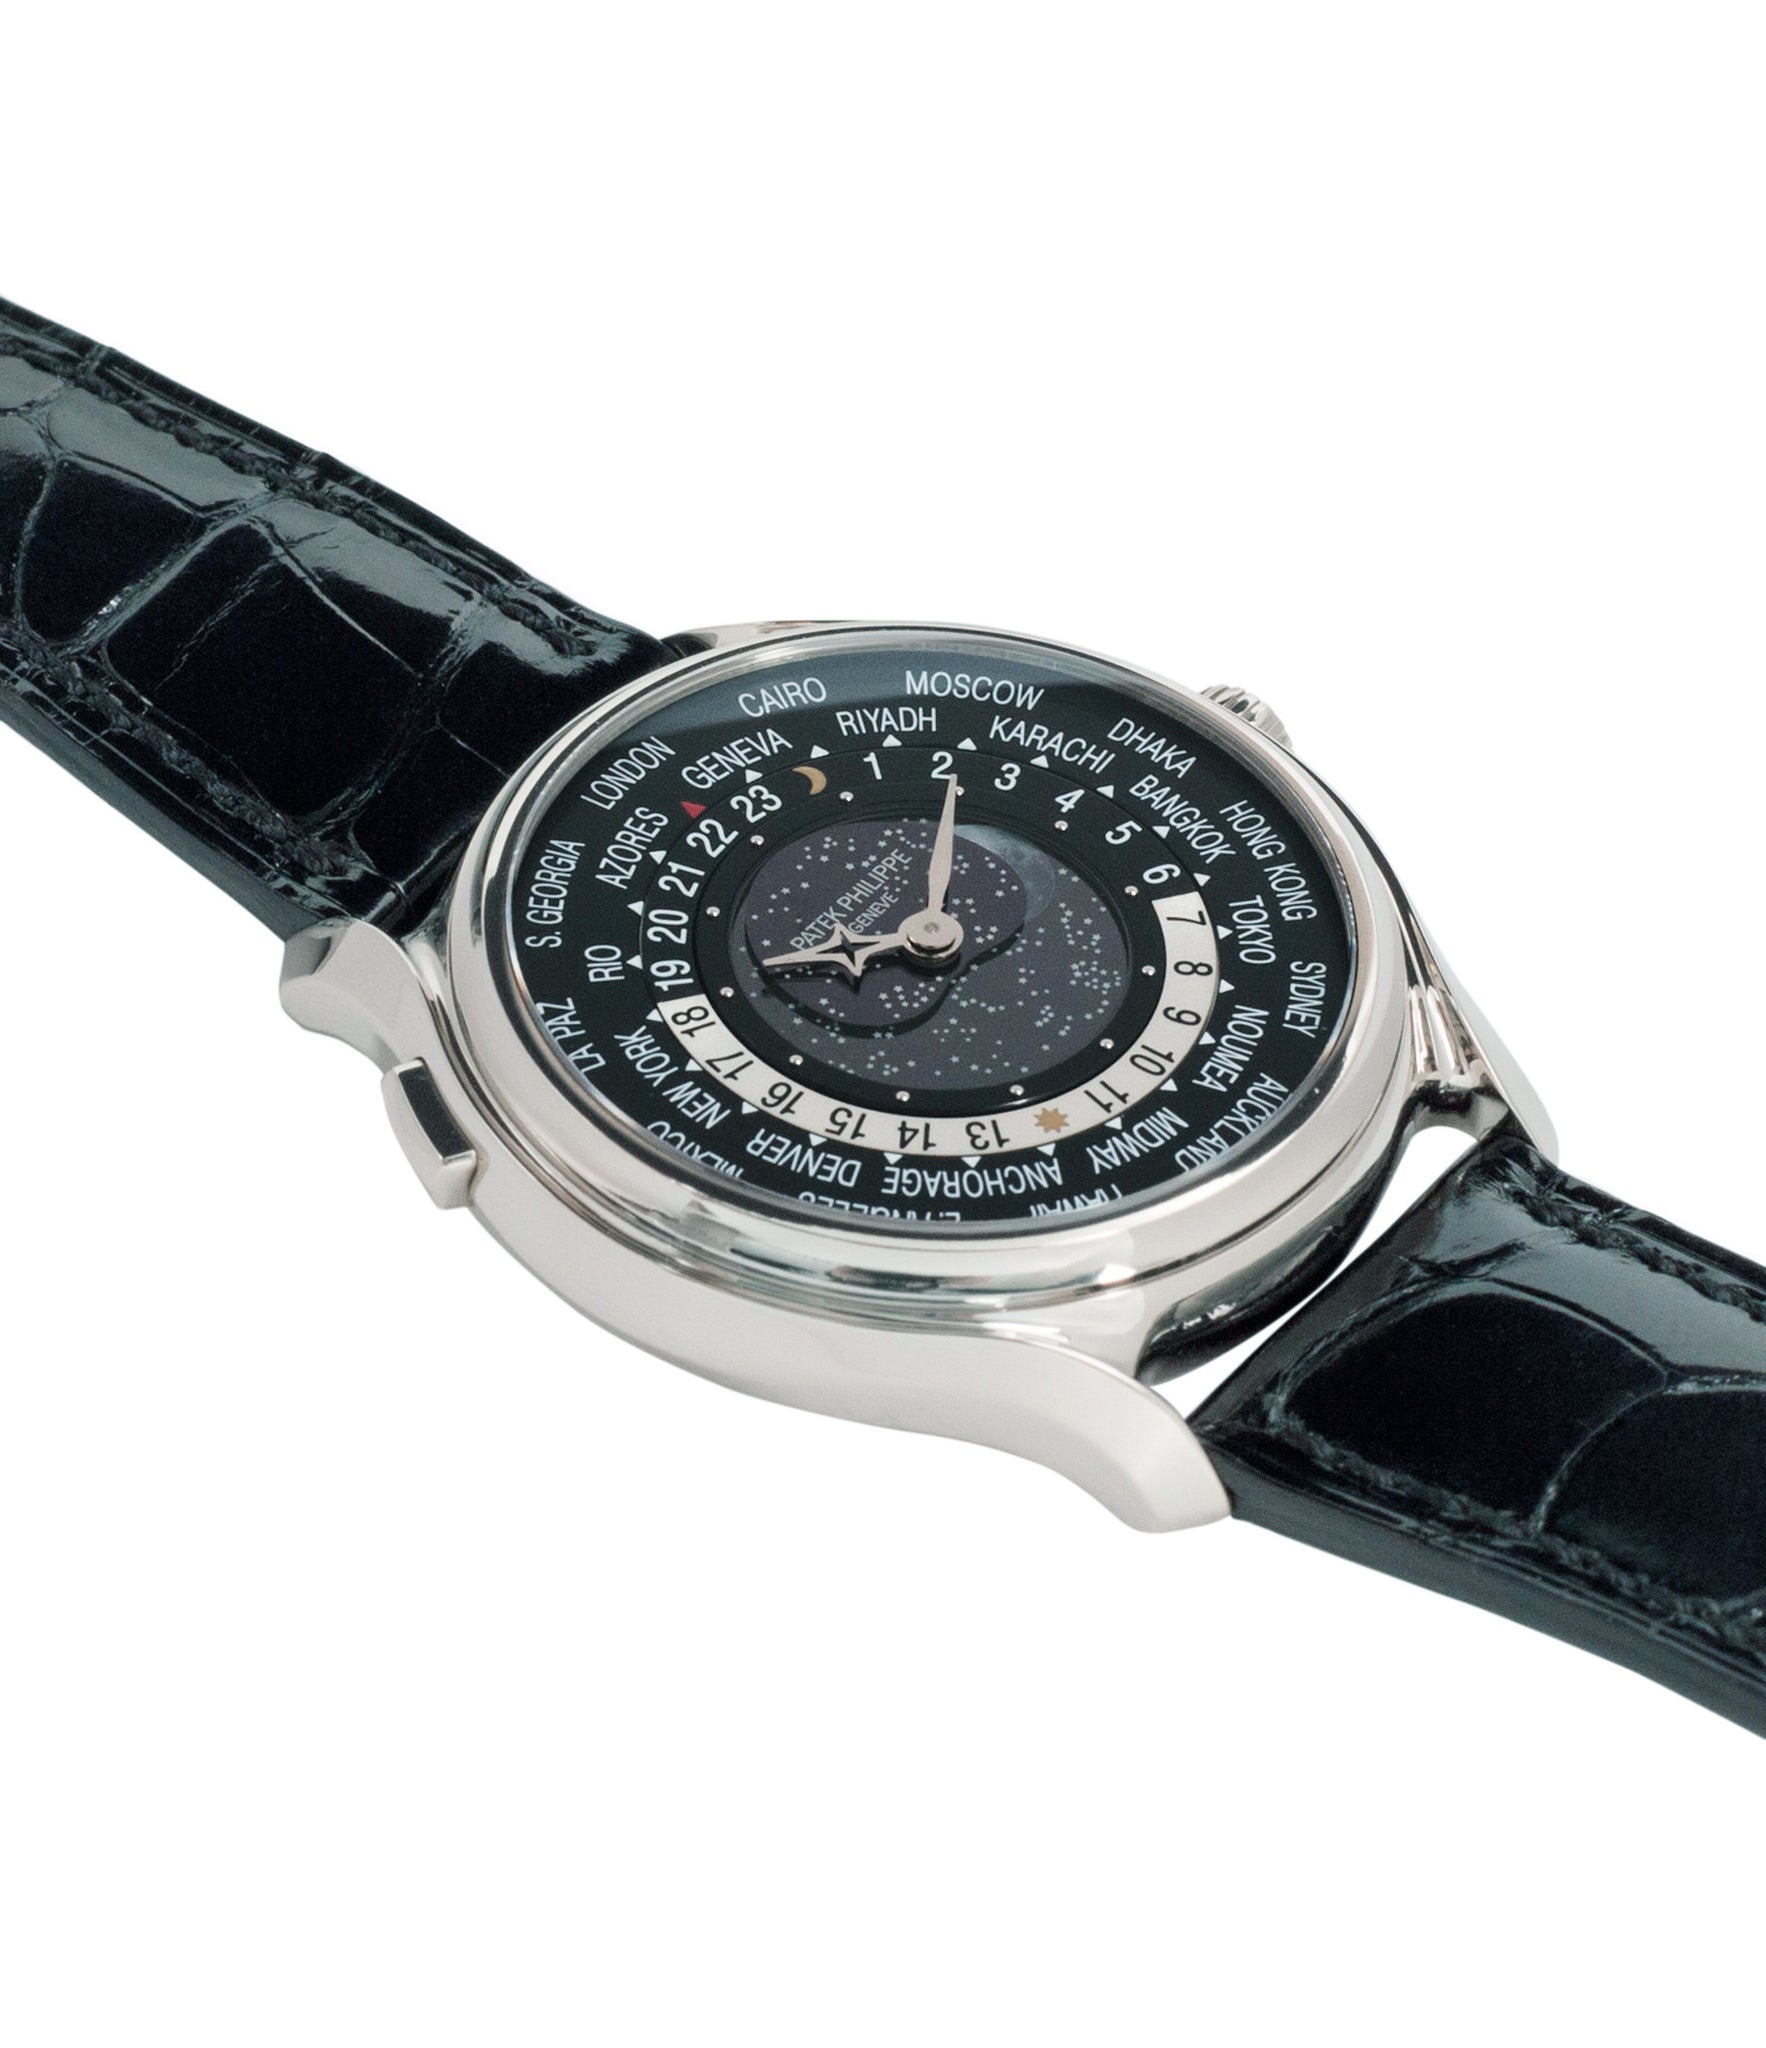 selling Patek Philippe Worldtimer Moonphase 5575G 175th Anniversary white gold preowned dress watch for sale online at A Collected Man London rare watch specialist